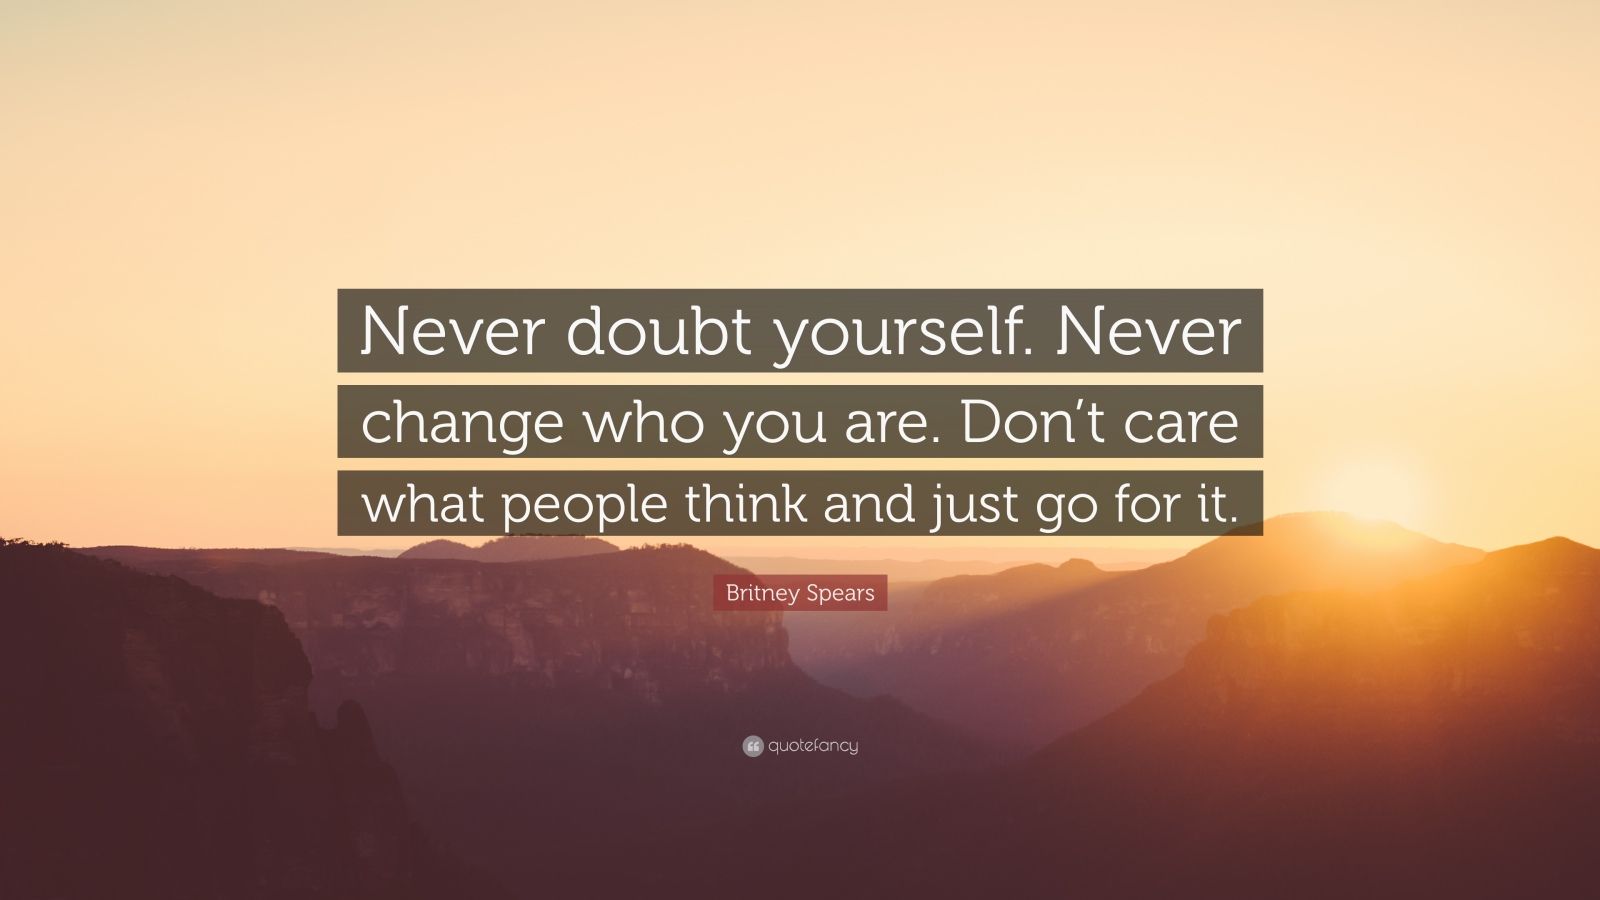 Britney Spears Quote: “Never doubt yourself. Never change who you are ...